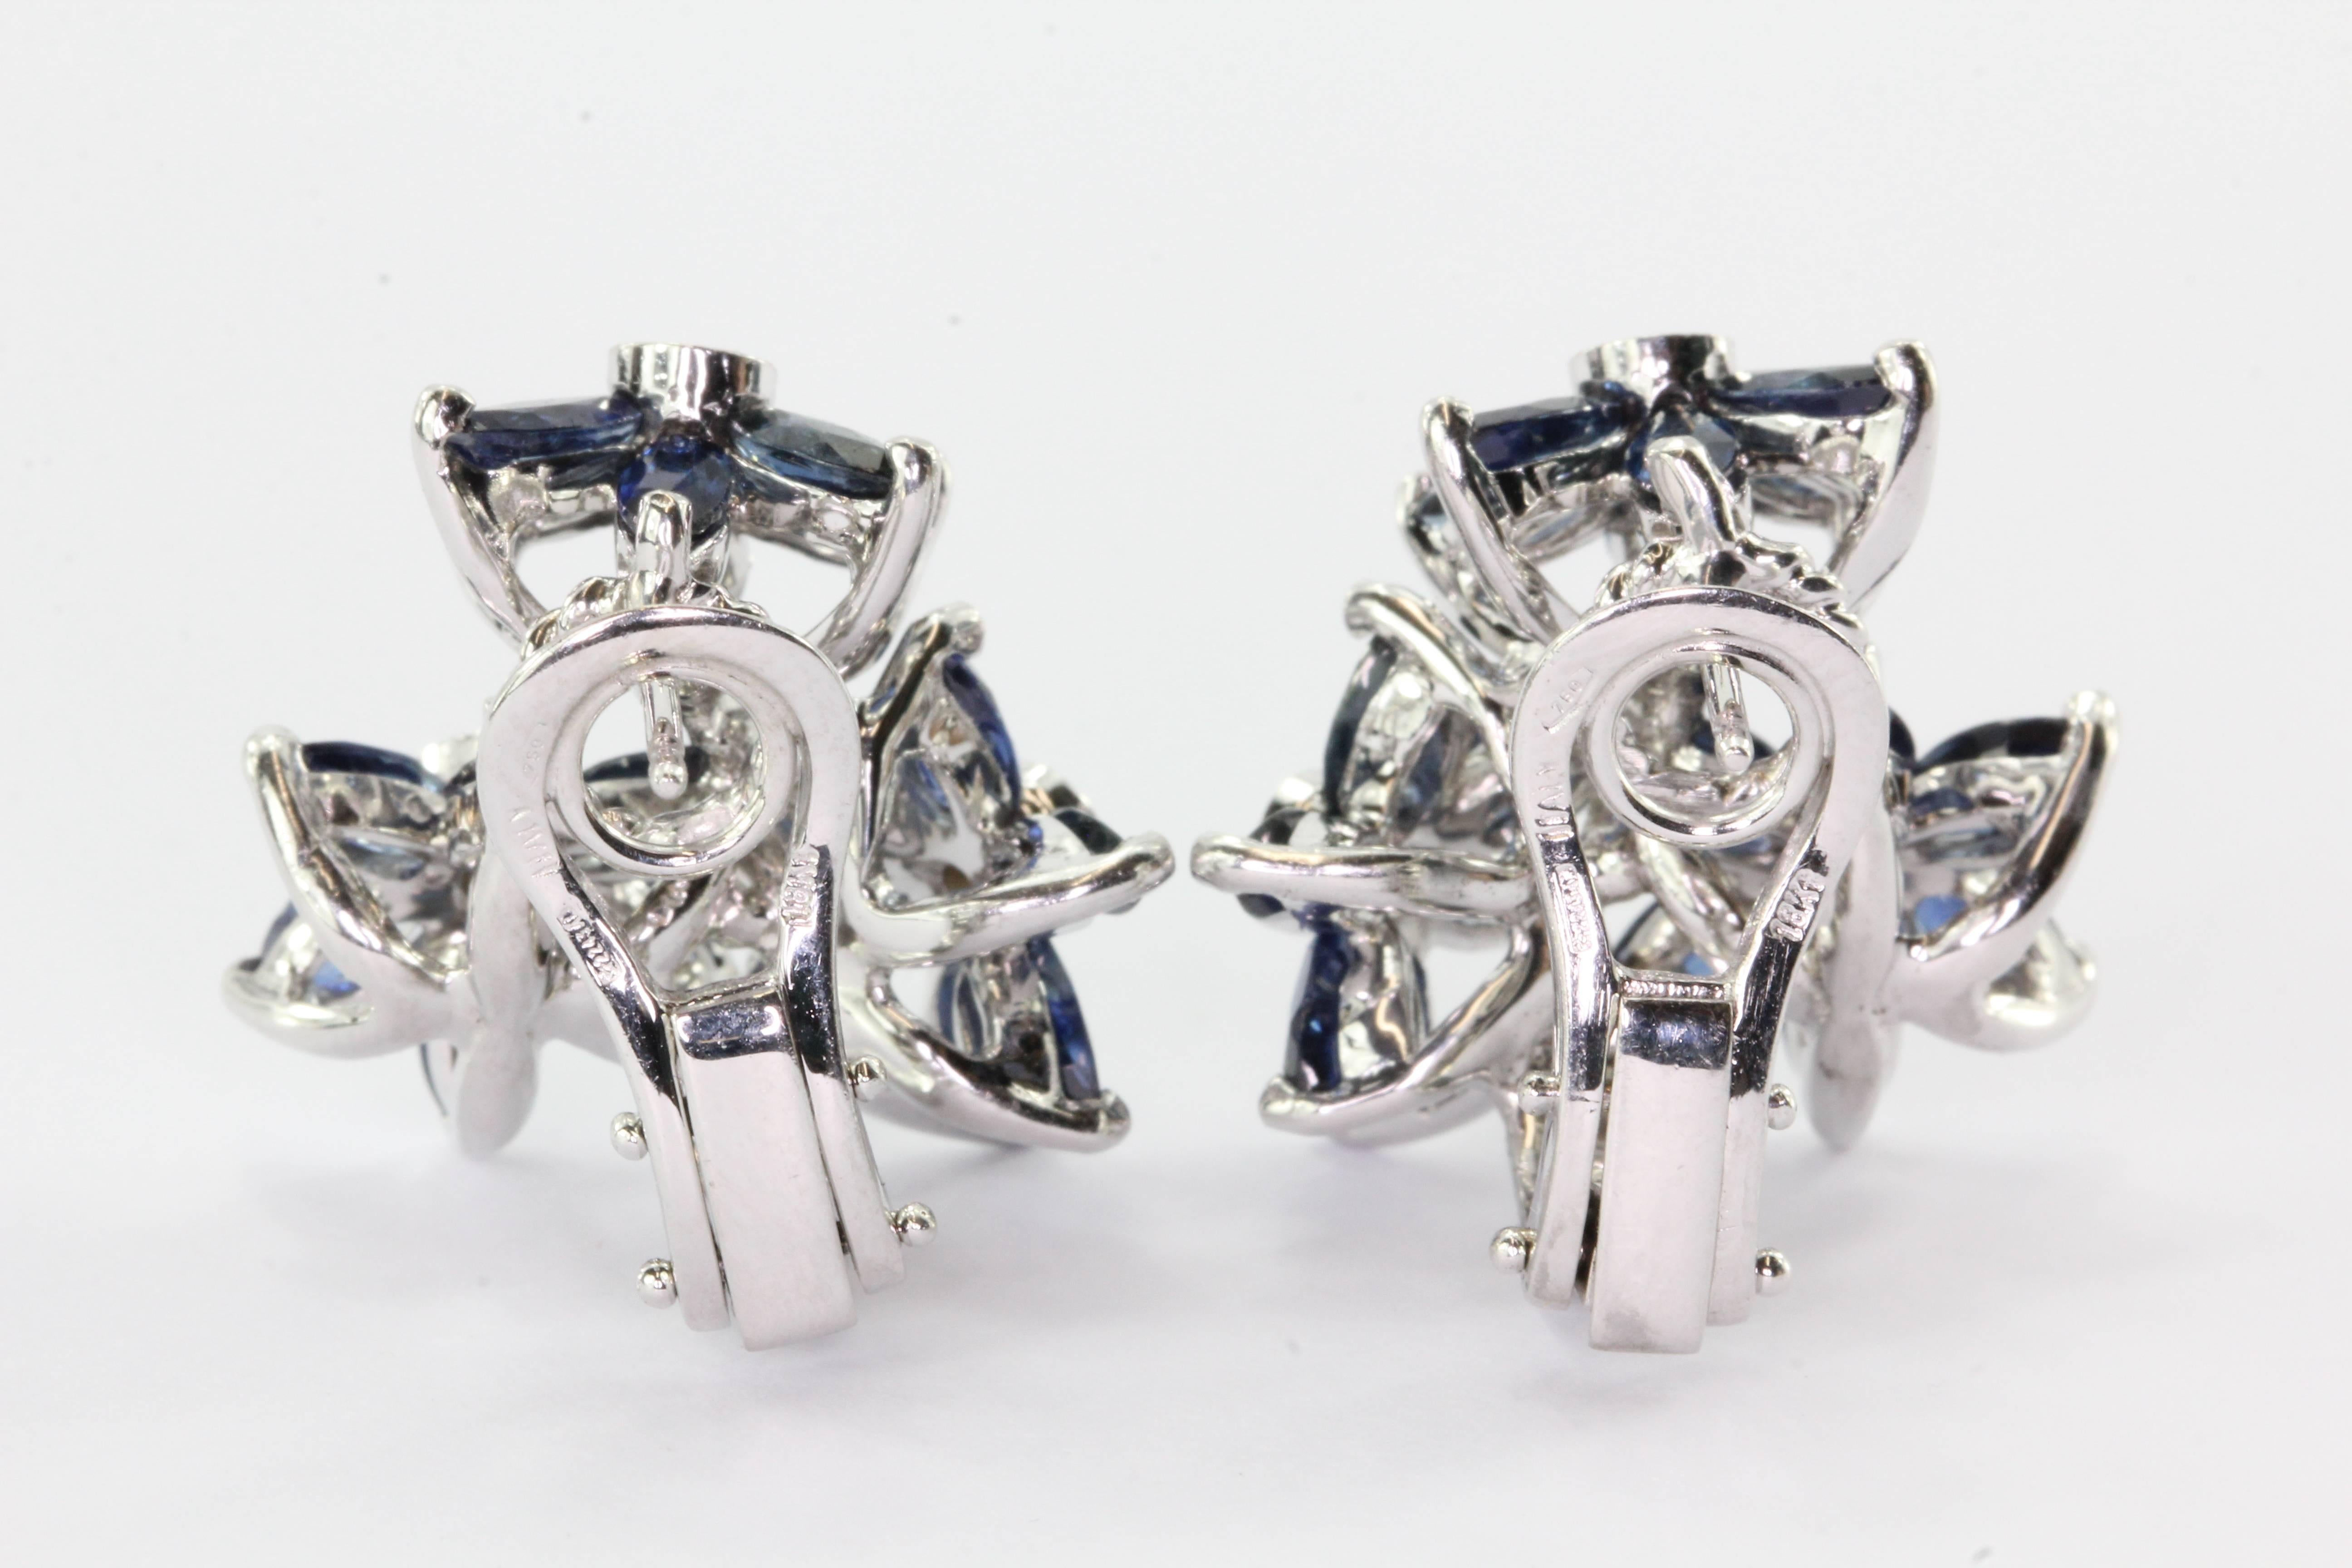 18K White Gold Sapphire & Diamond Triple Flower Earrings. The earrings are in excellent estate condition and ready to wear. They are hallmarked 